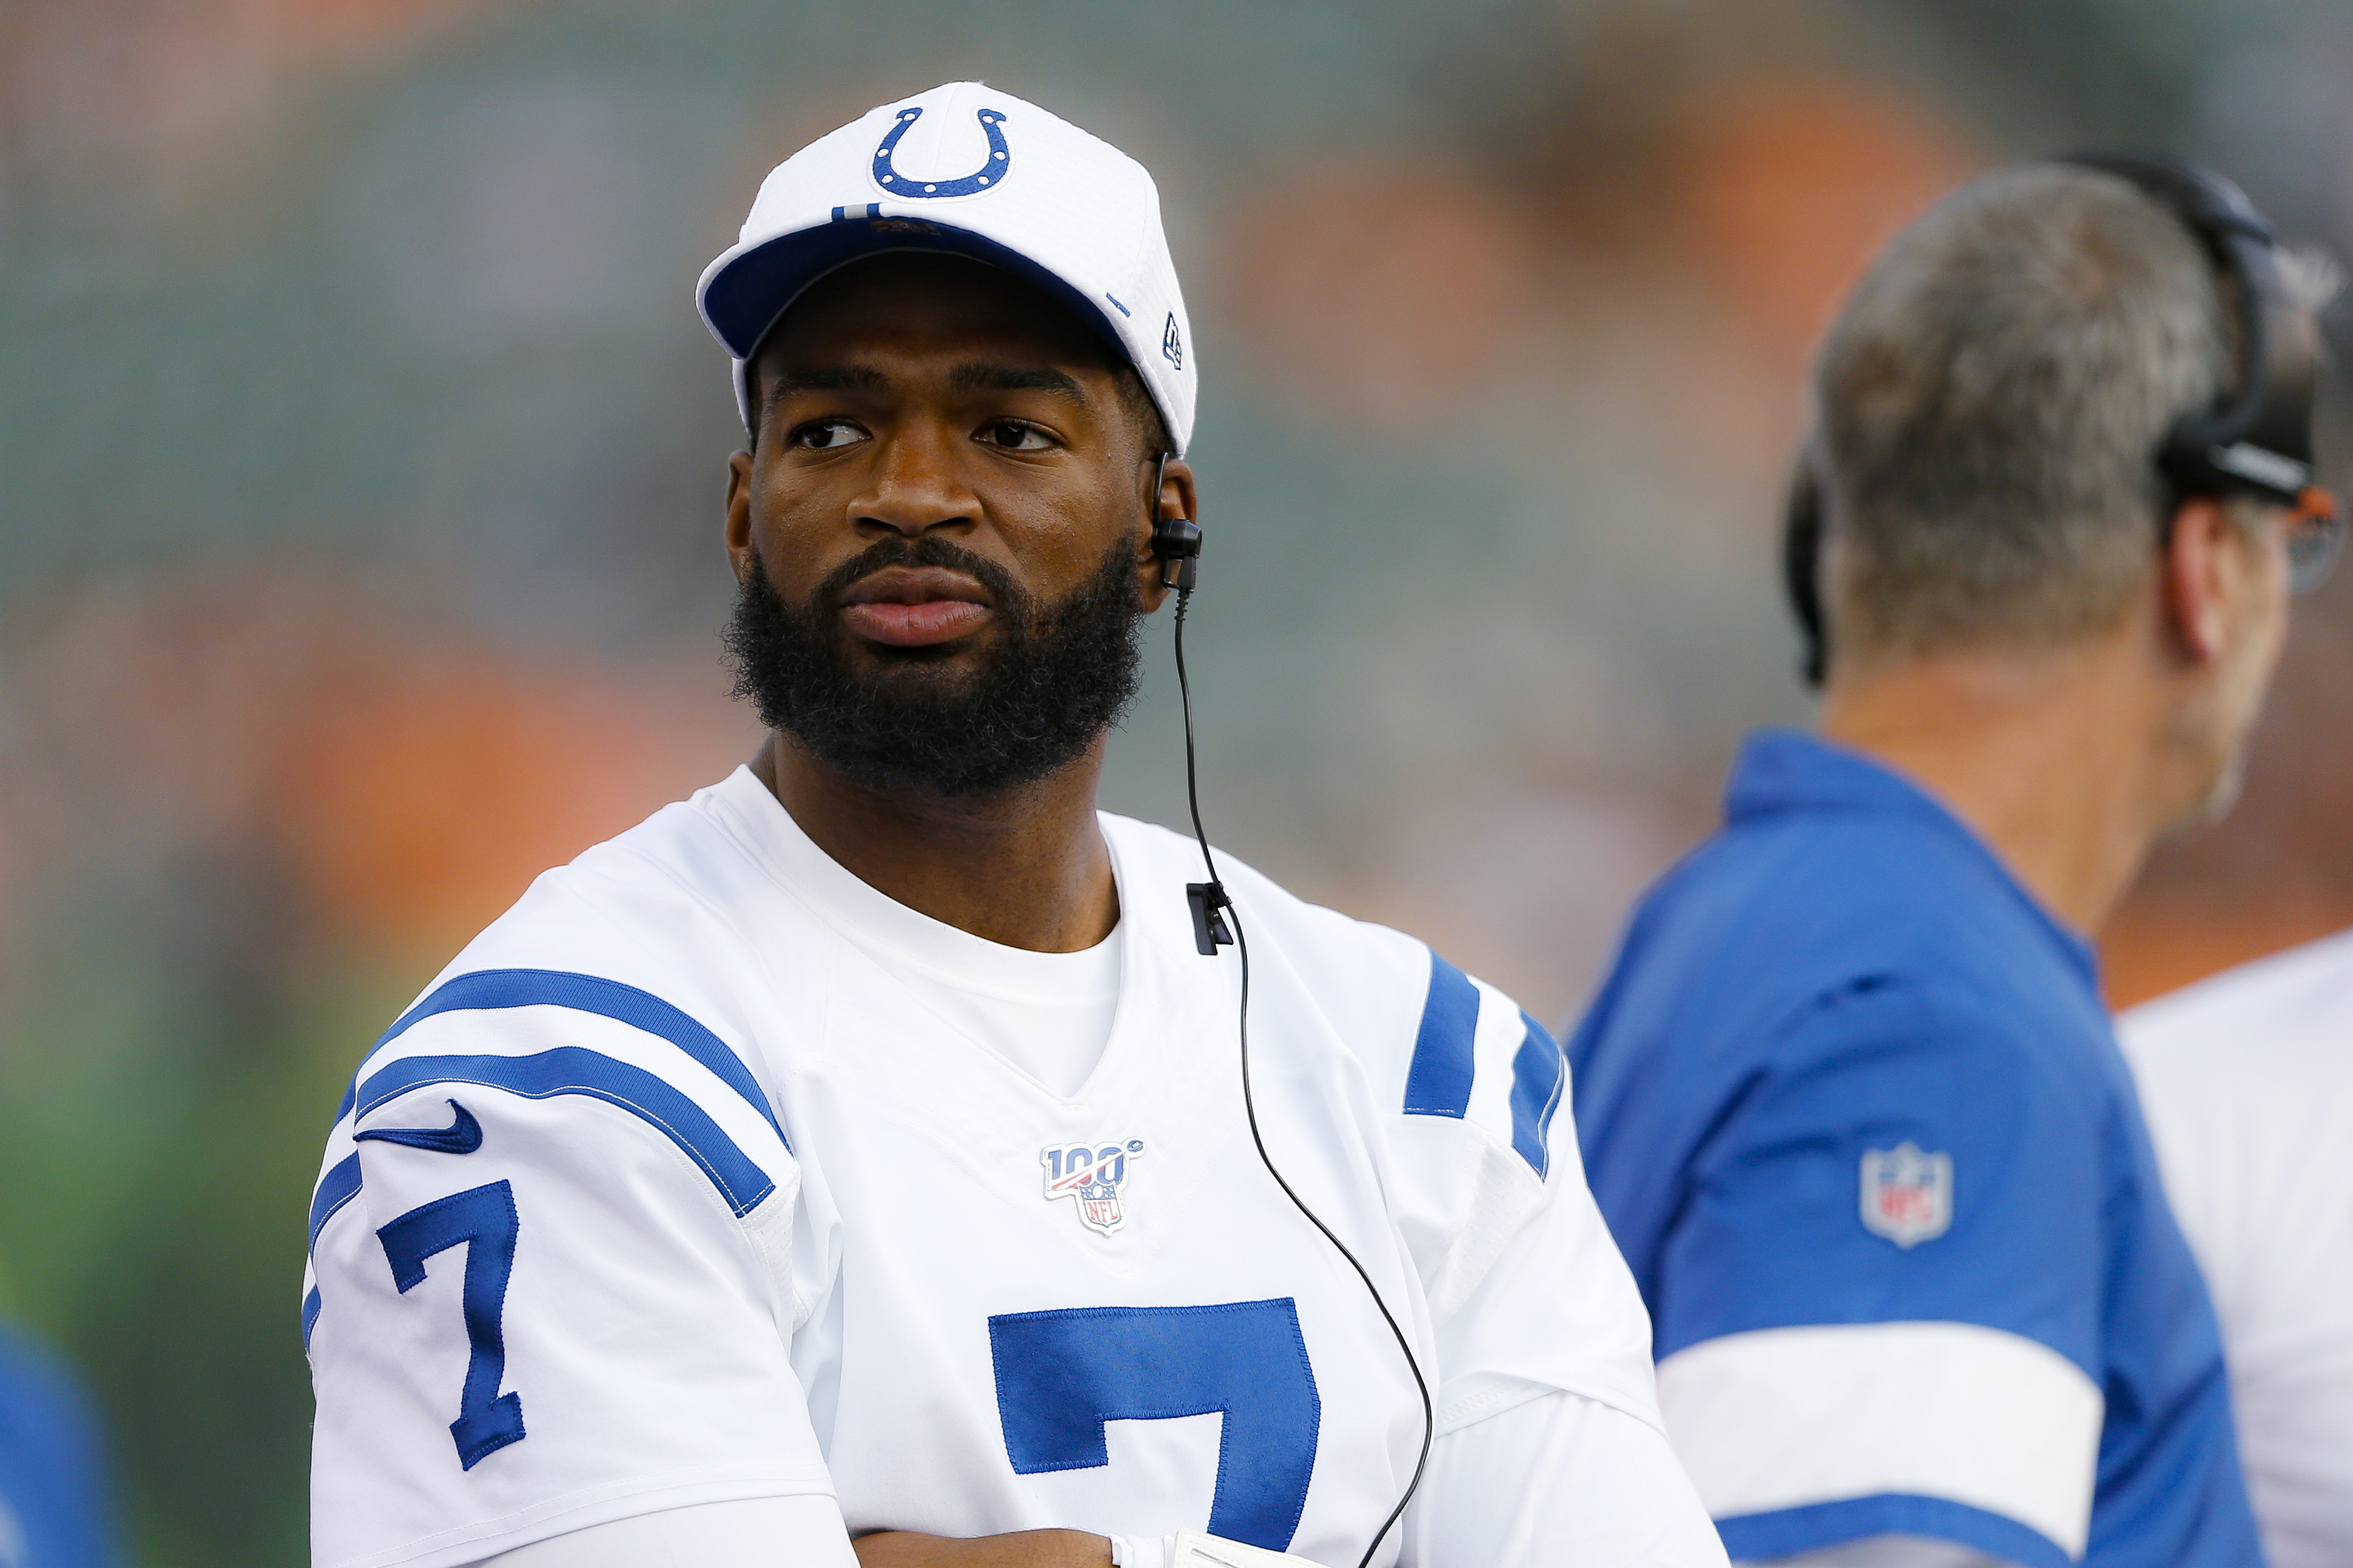 Luck-less Colts finish preseason with 13-6 win over Bengals